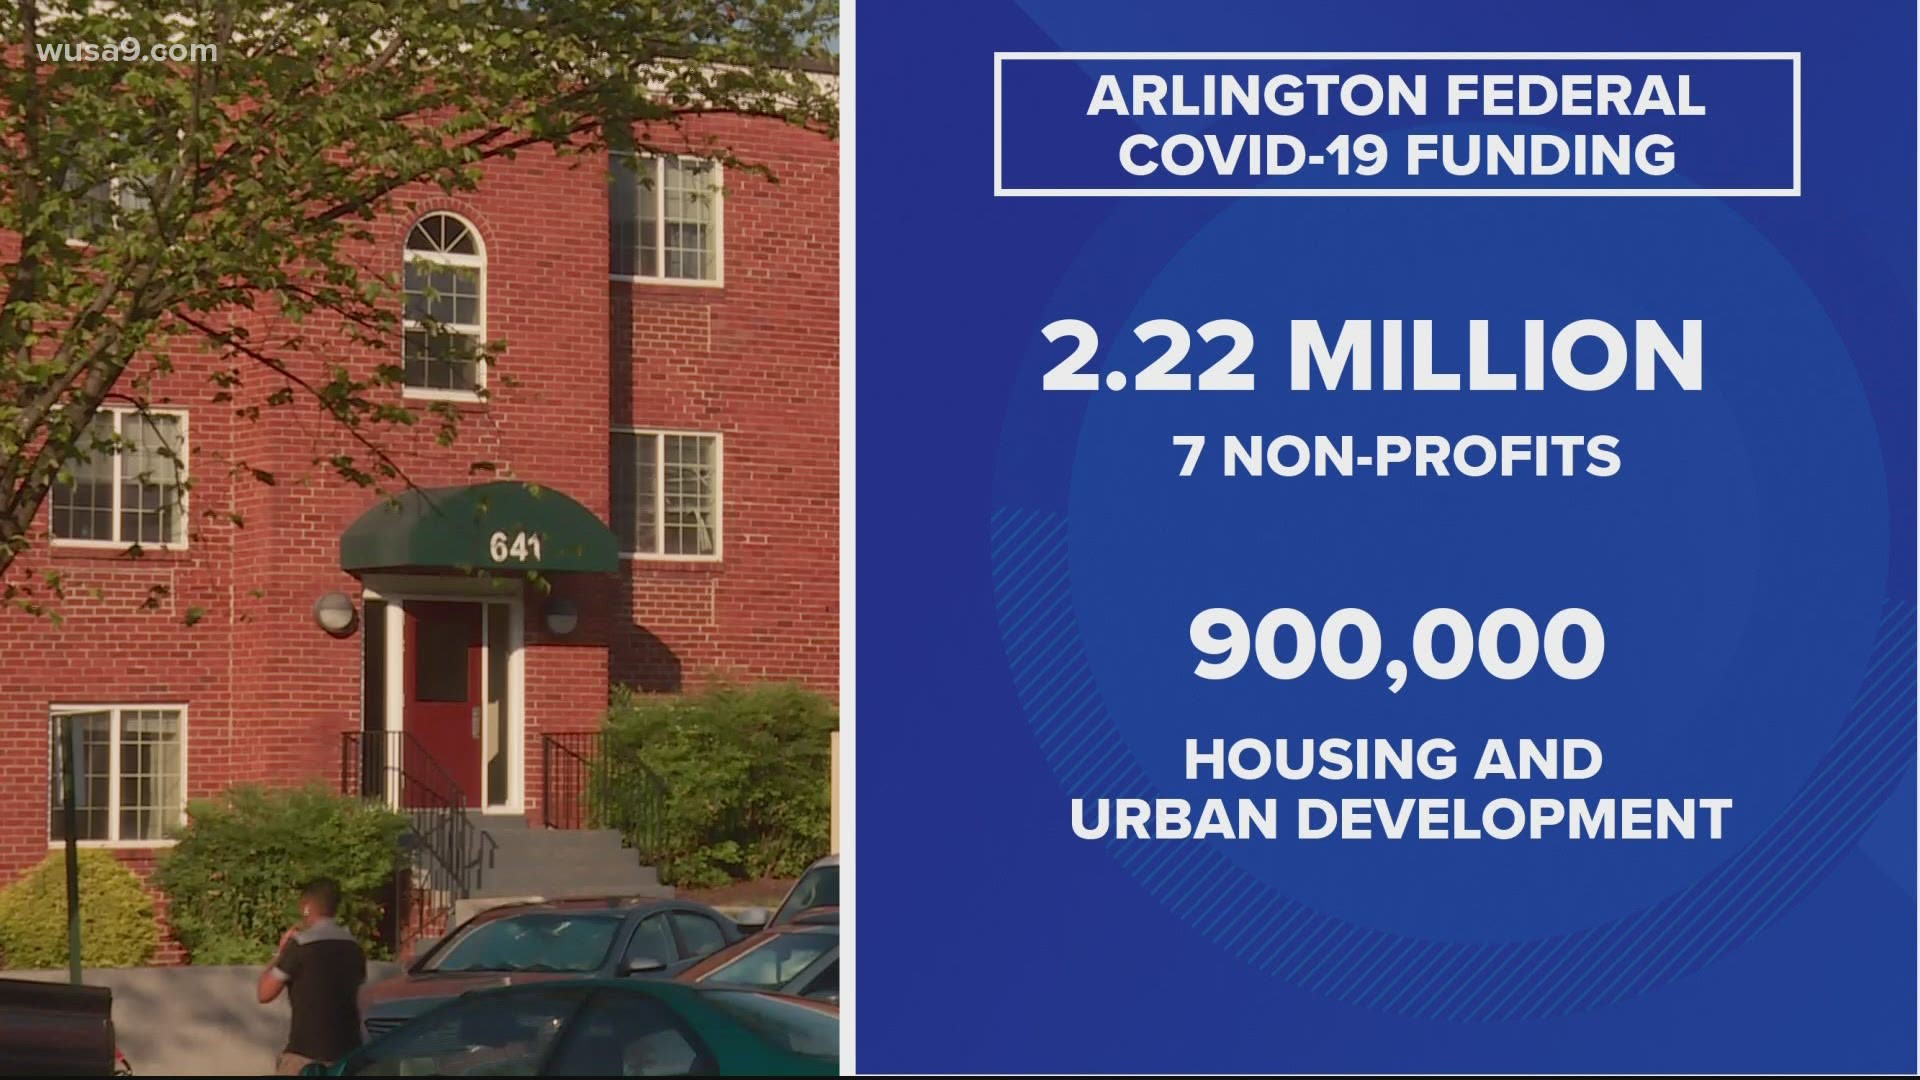 Most of the money will be distributed to non-profits throughout Arlington while the other portion will go towards housing relief.